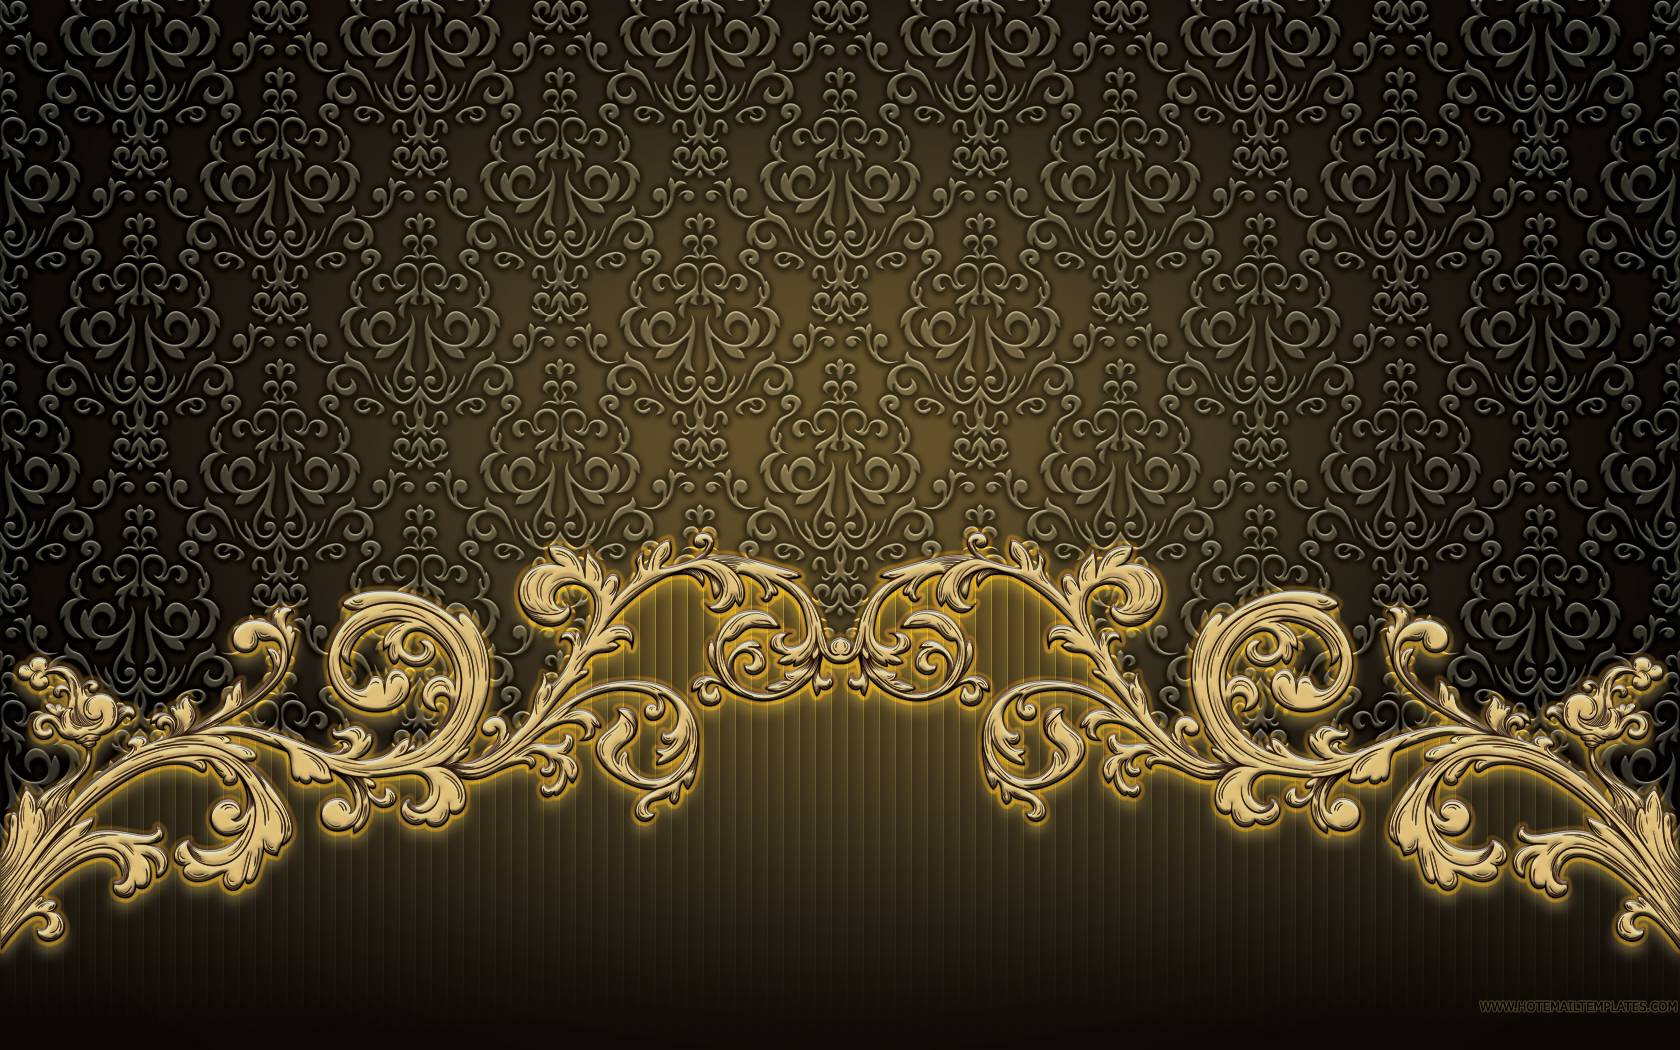 Adorable Royalty Background, Royalty Wallpaper 37 Wallpaper